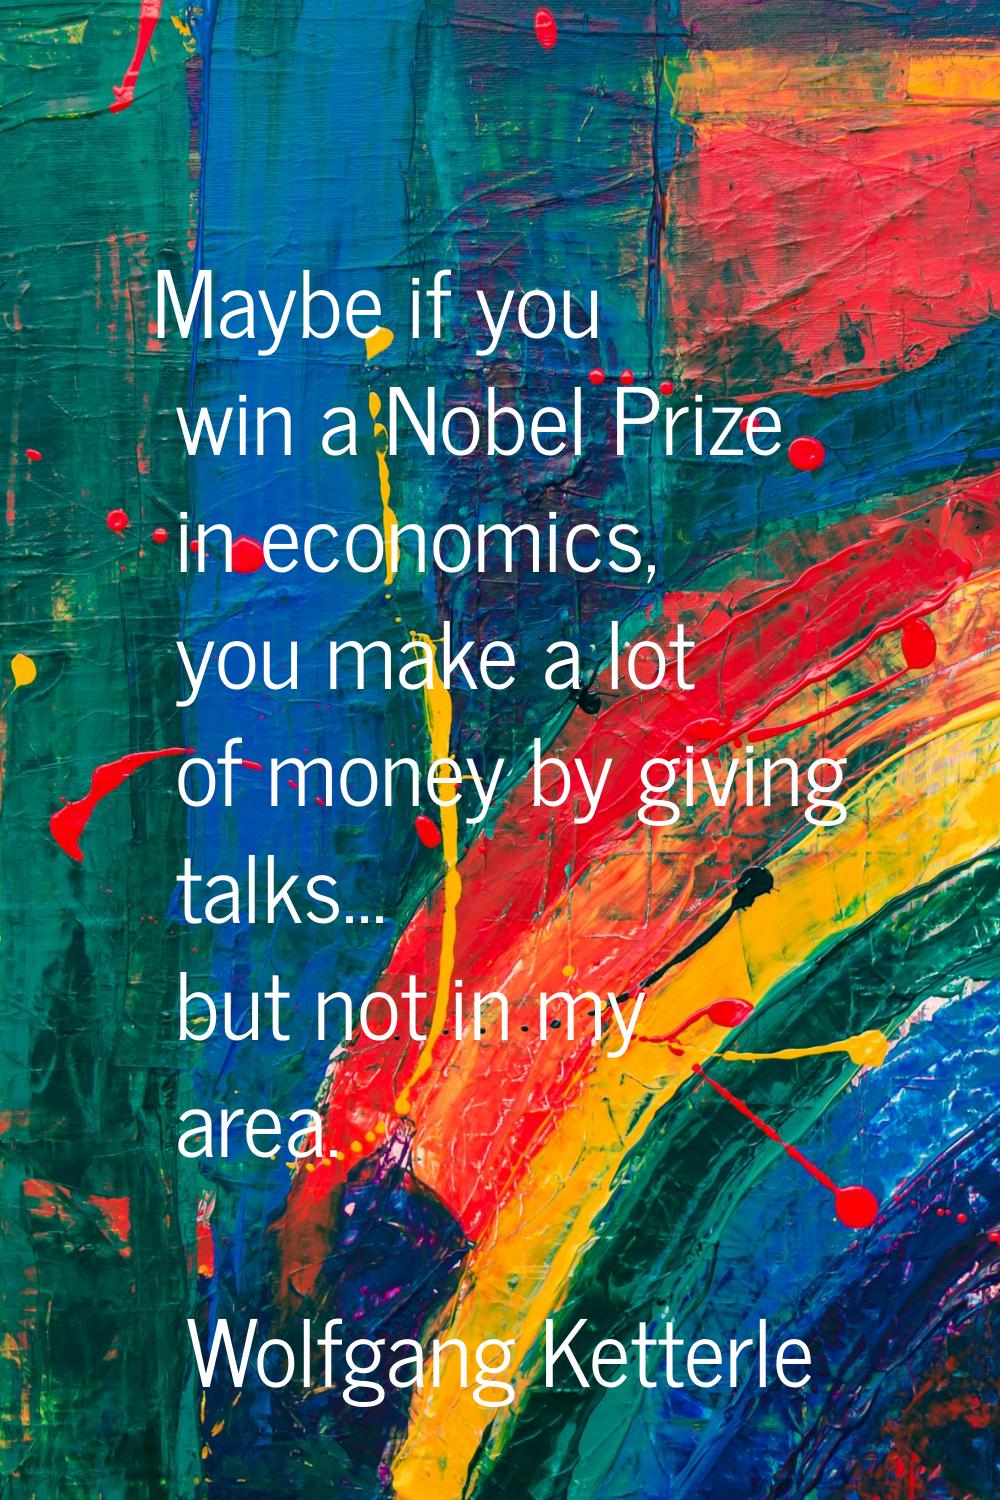 Maybe if you win a Nobel Prize in economics, you make a lot of money by giving talks... but not in 